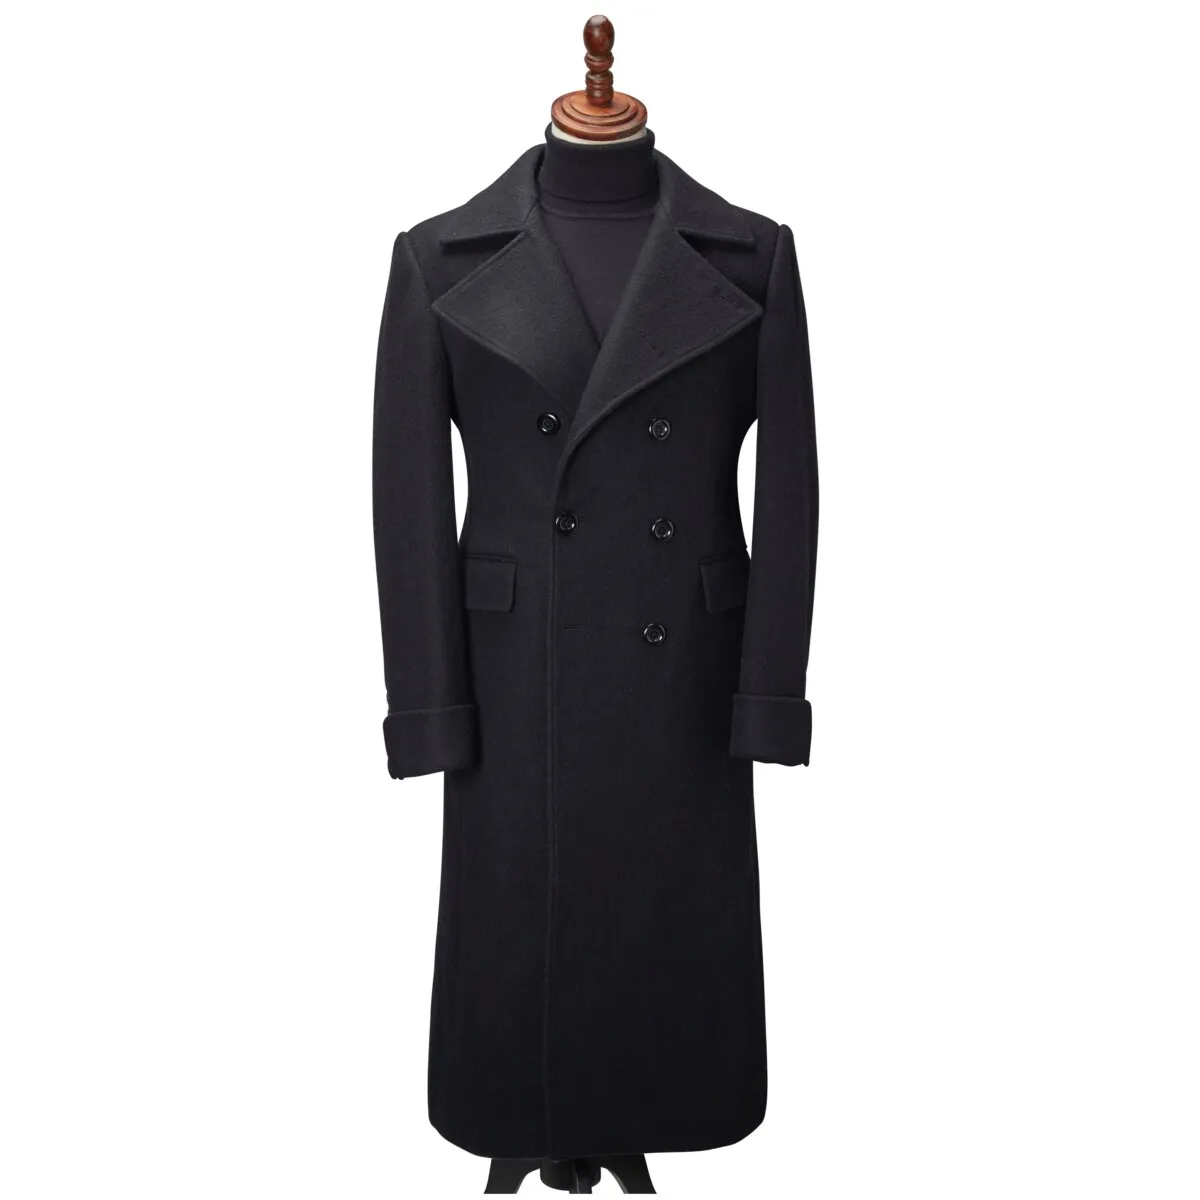 

2021 Black Thick Greatcoat Wool Men Suits Peaked Lapel Outfit Custom Made One Piece Long Overcoat High Quality Jacket